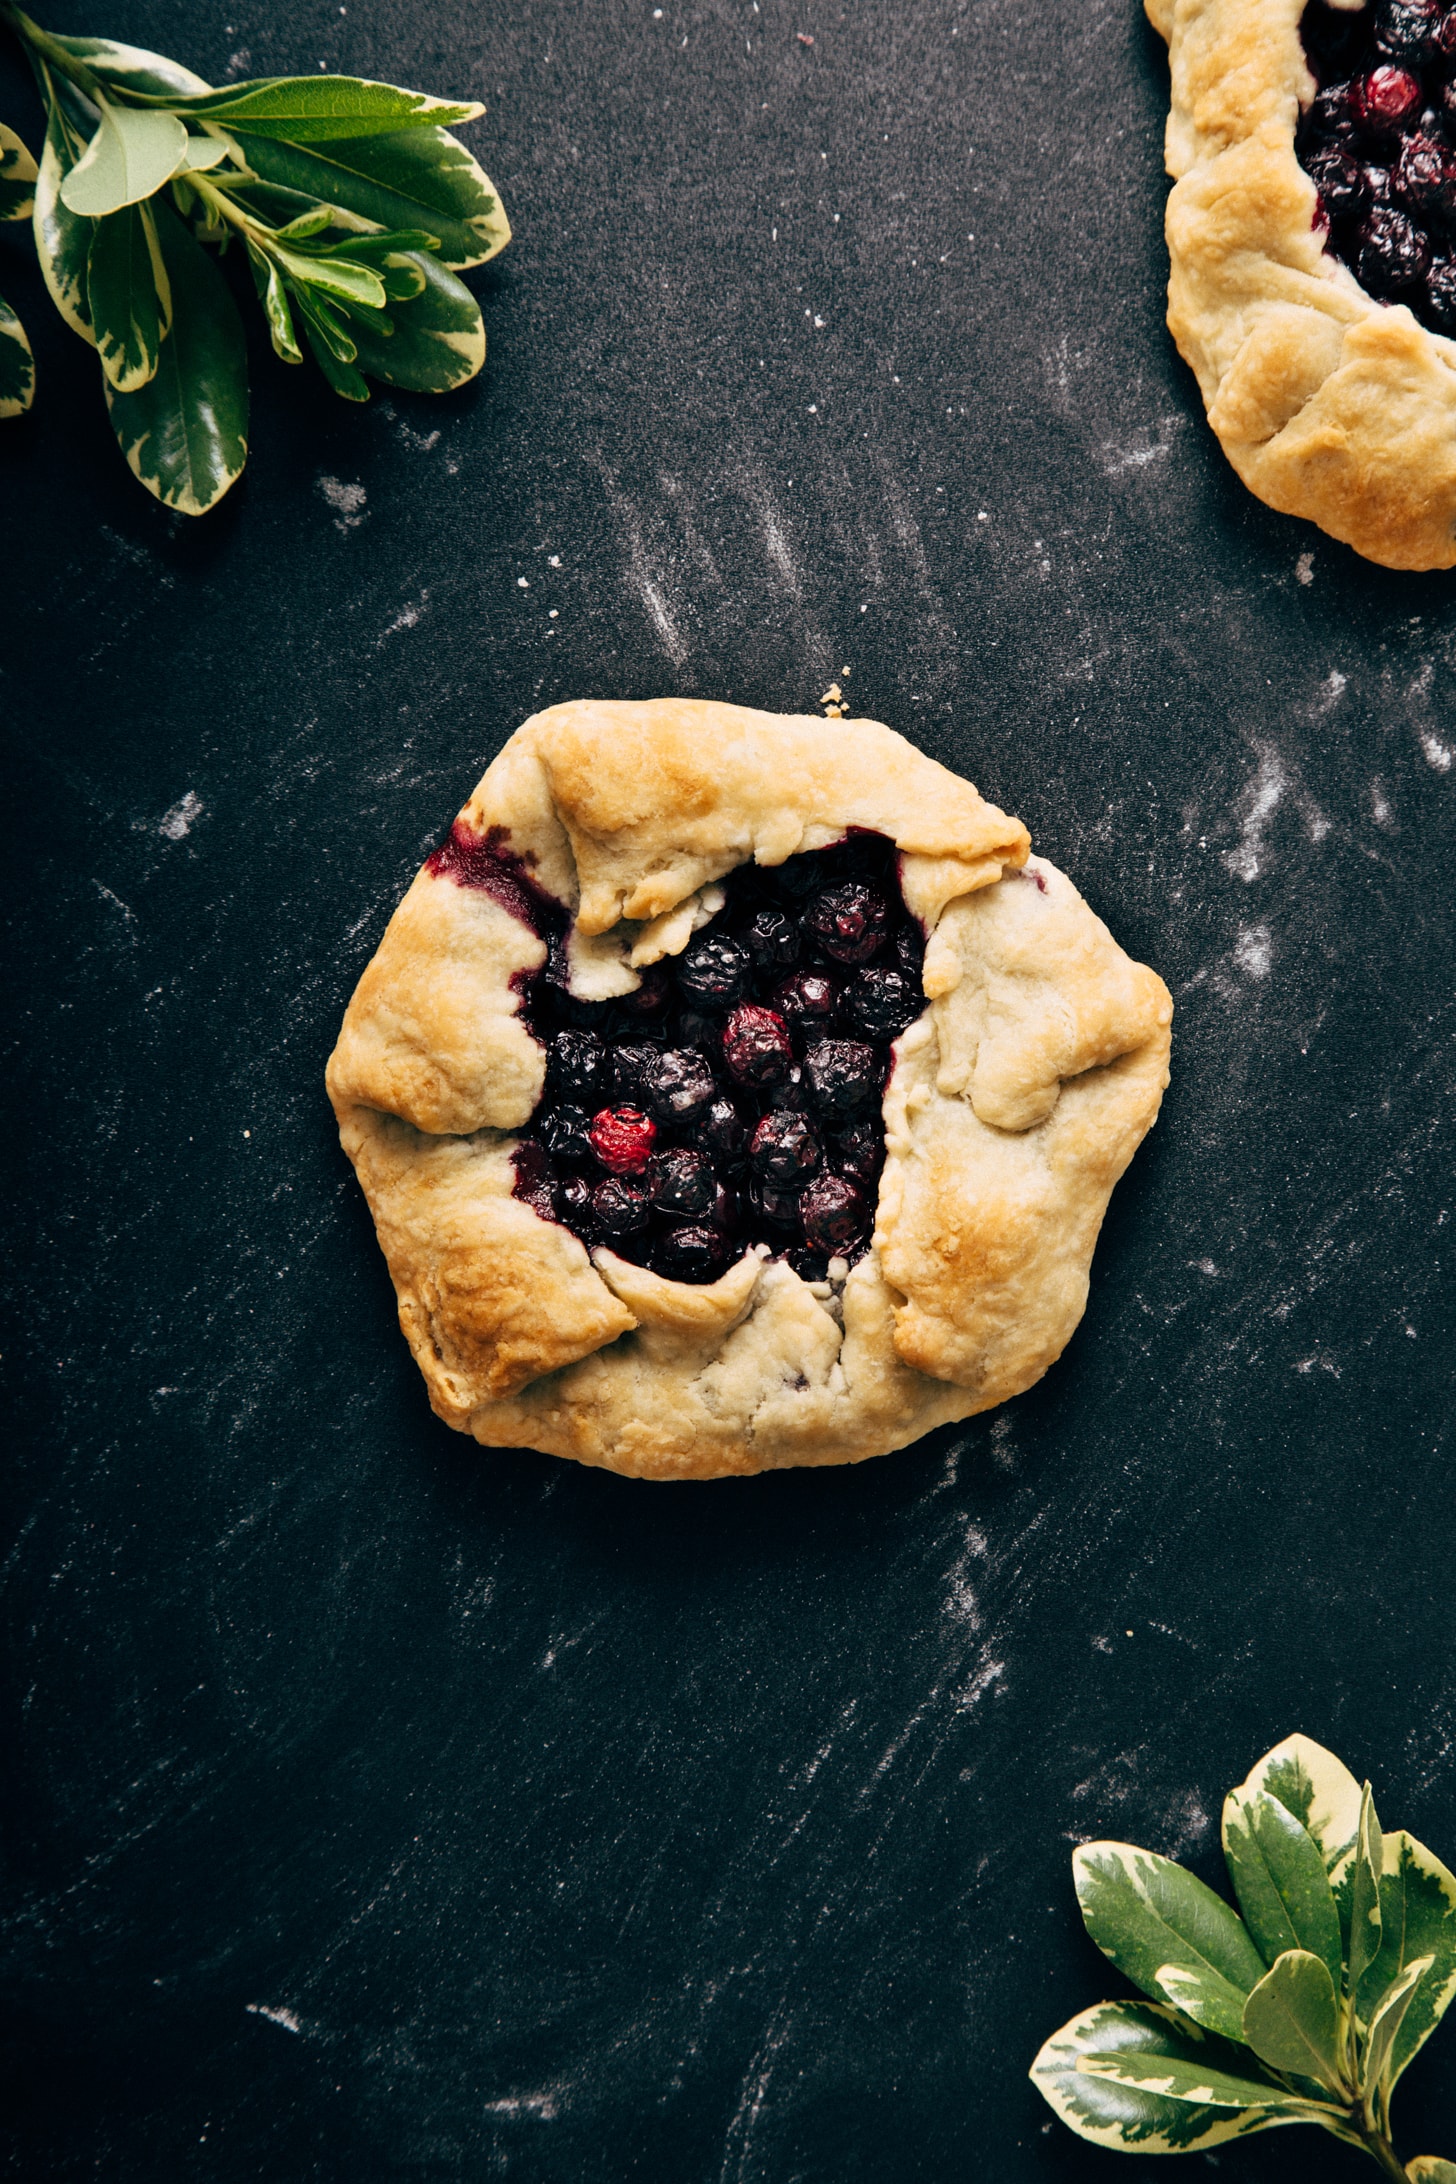 Perfectly browned Mini Blueberry Galette on a dark background